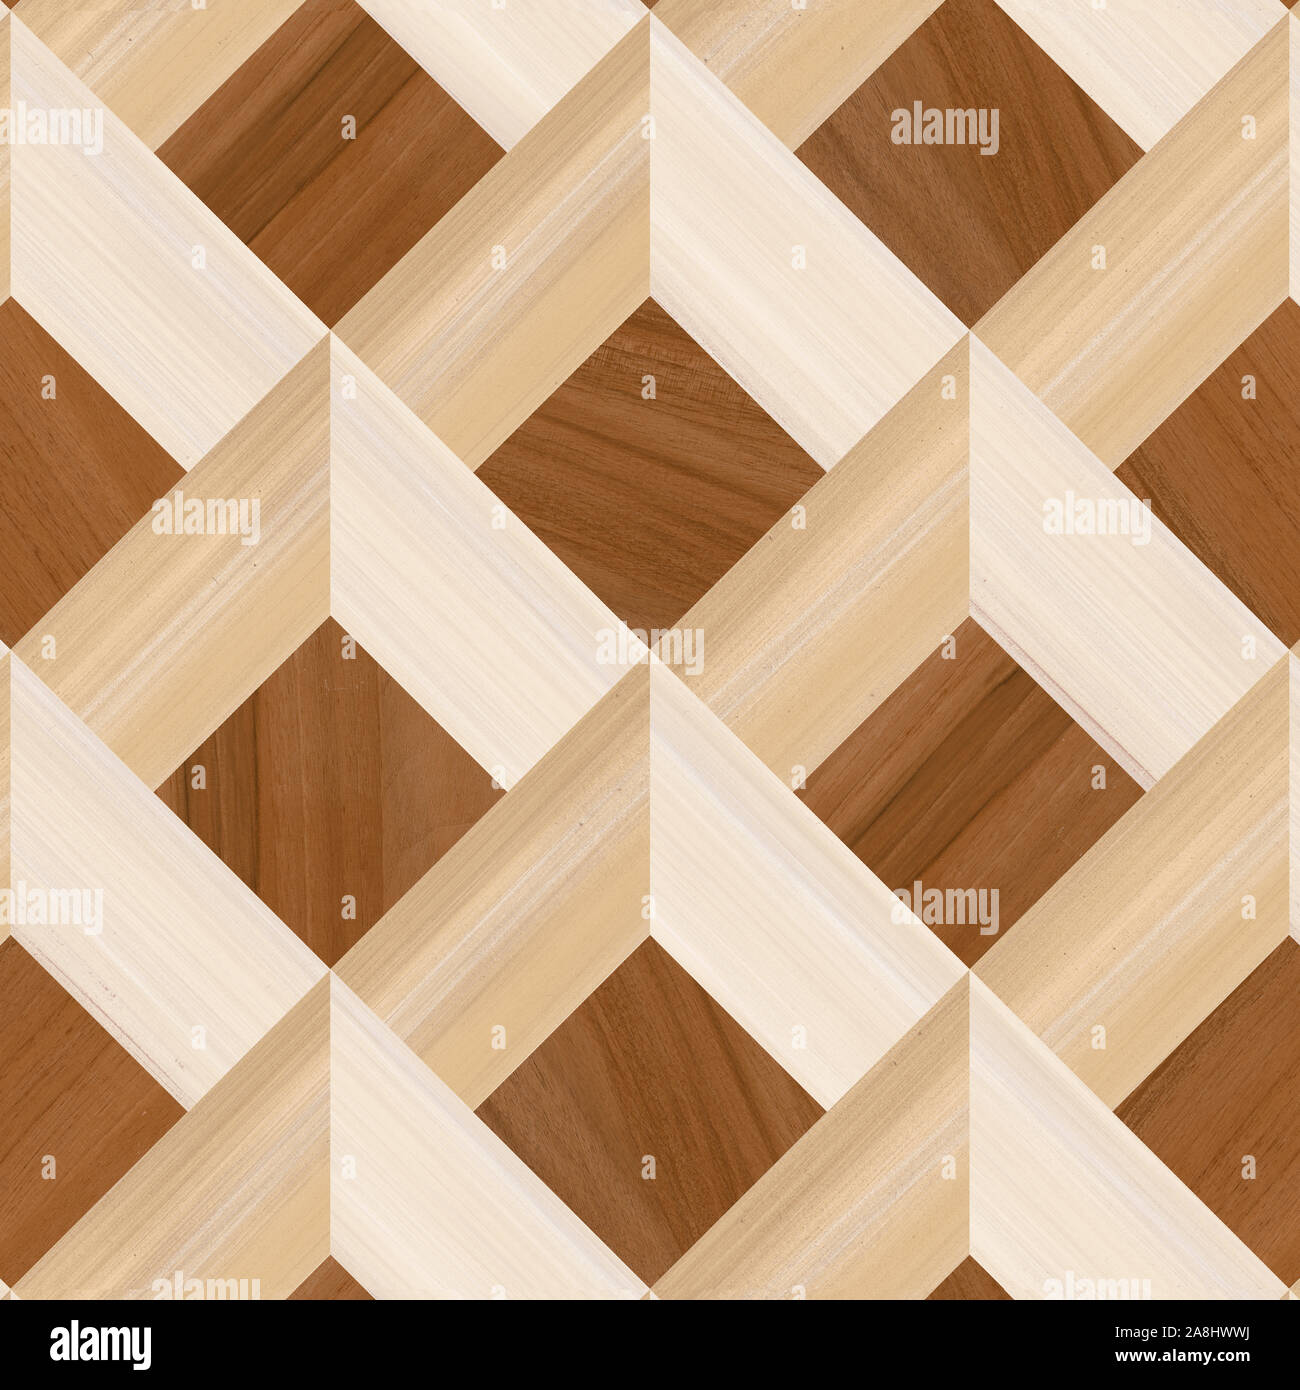 Abstract Home Decorative Wooden Wall And Floor Design Background 3d Shape Wooden Background Stock Photo Alamy